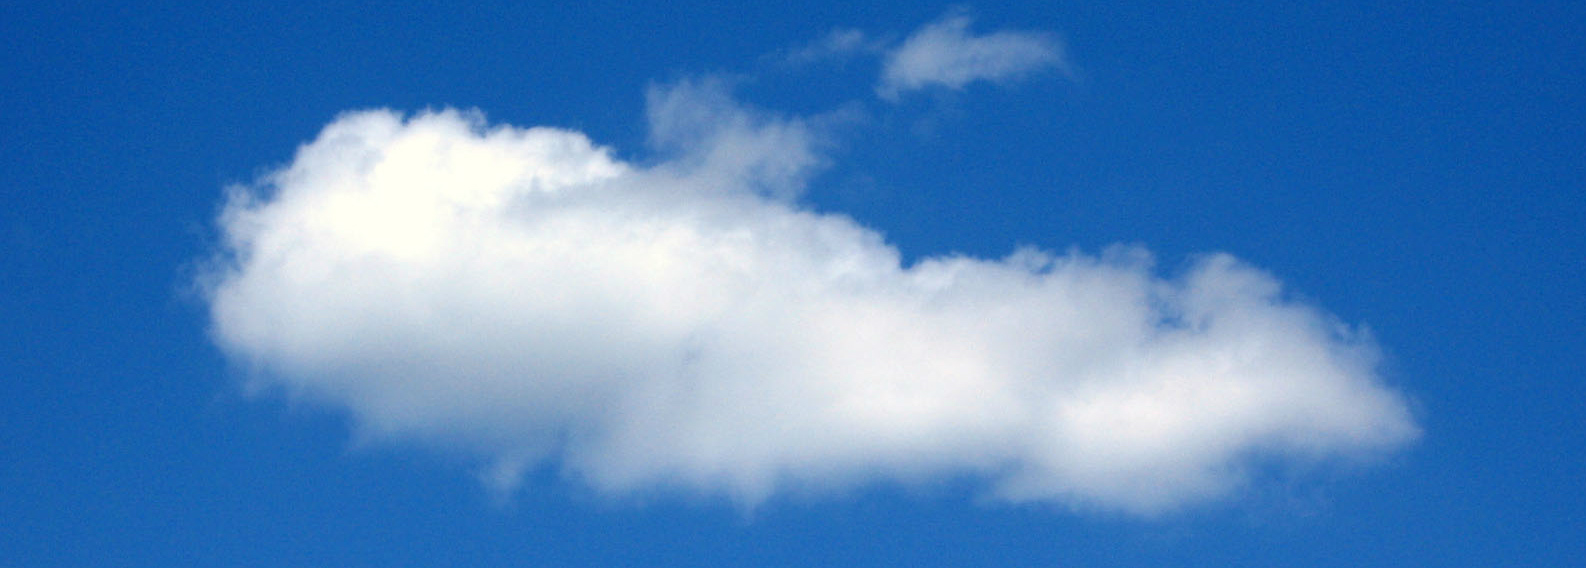 Image of white cloud in blue sky